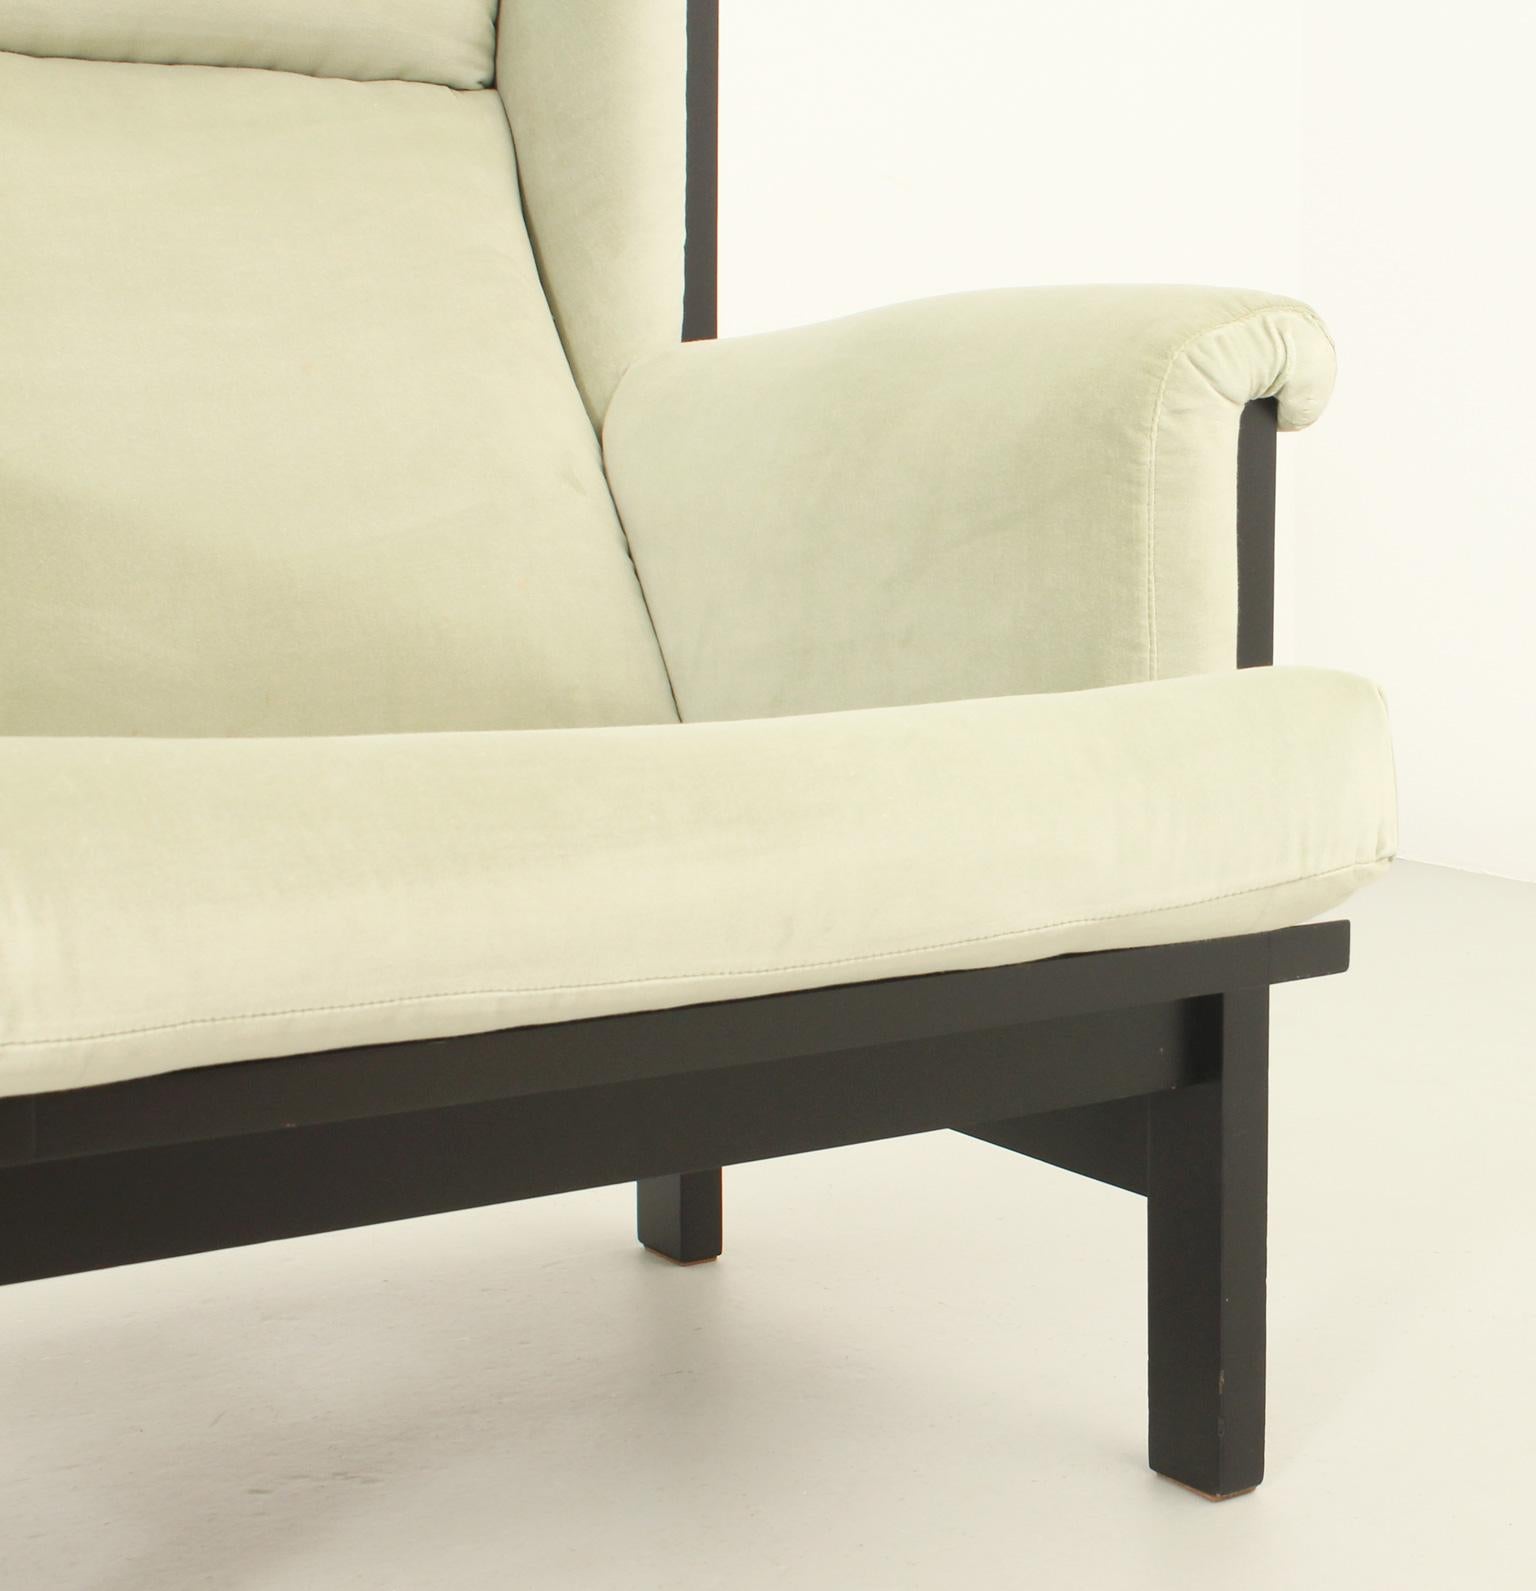 San Remo Armchair By Rafael Carreras, Spain, 1959 For Sale 2